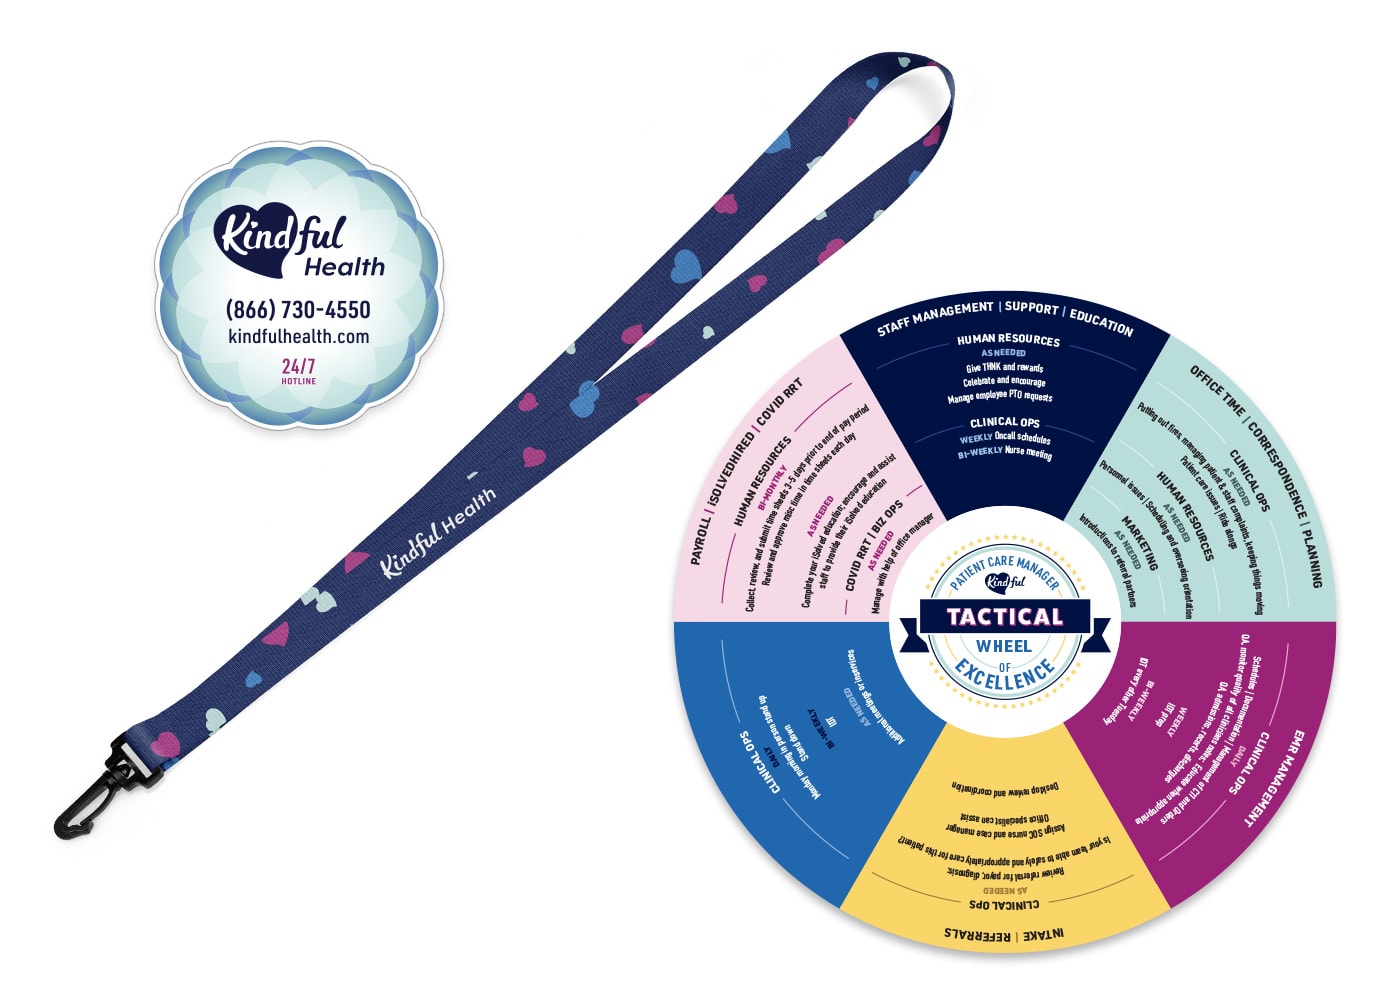 Kindful Health magnet with contact information, branded lanyard, and circular disc with day-to-day tasks labeled by category.